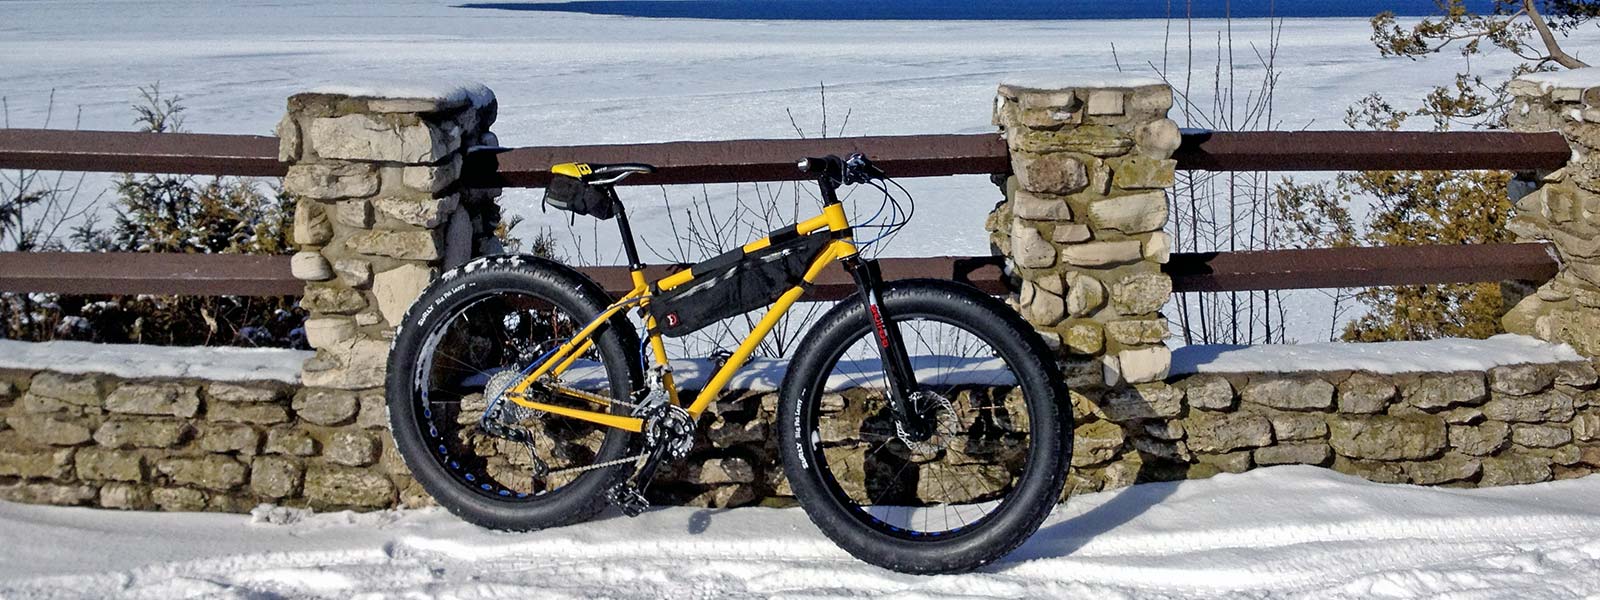 Everyday Cycles Fatbike 101 Series - Learn About Fatbikes